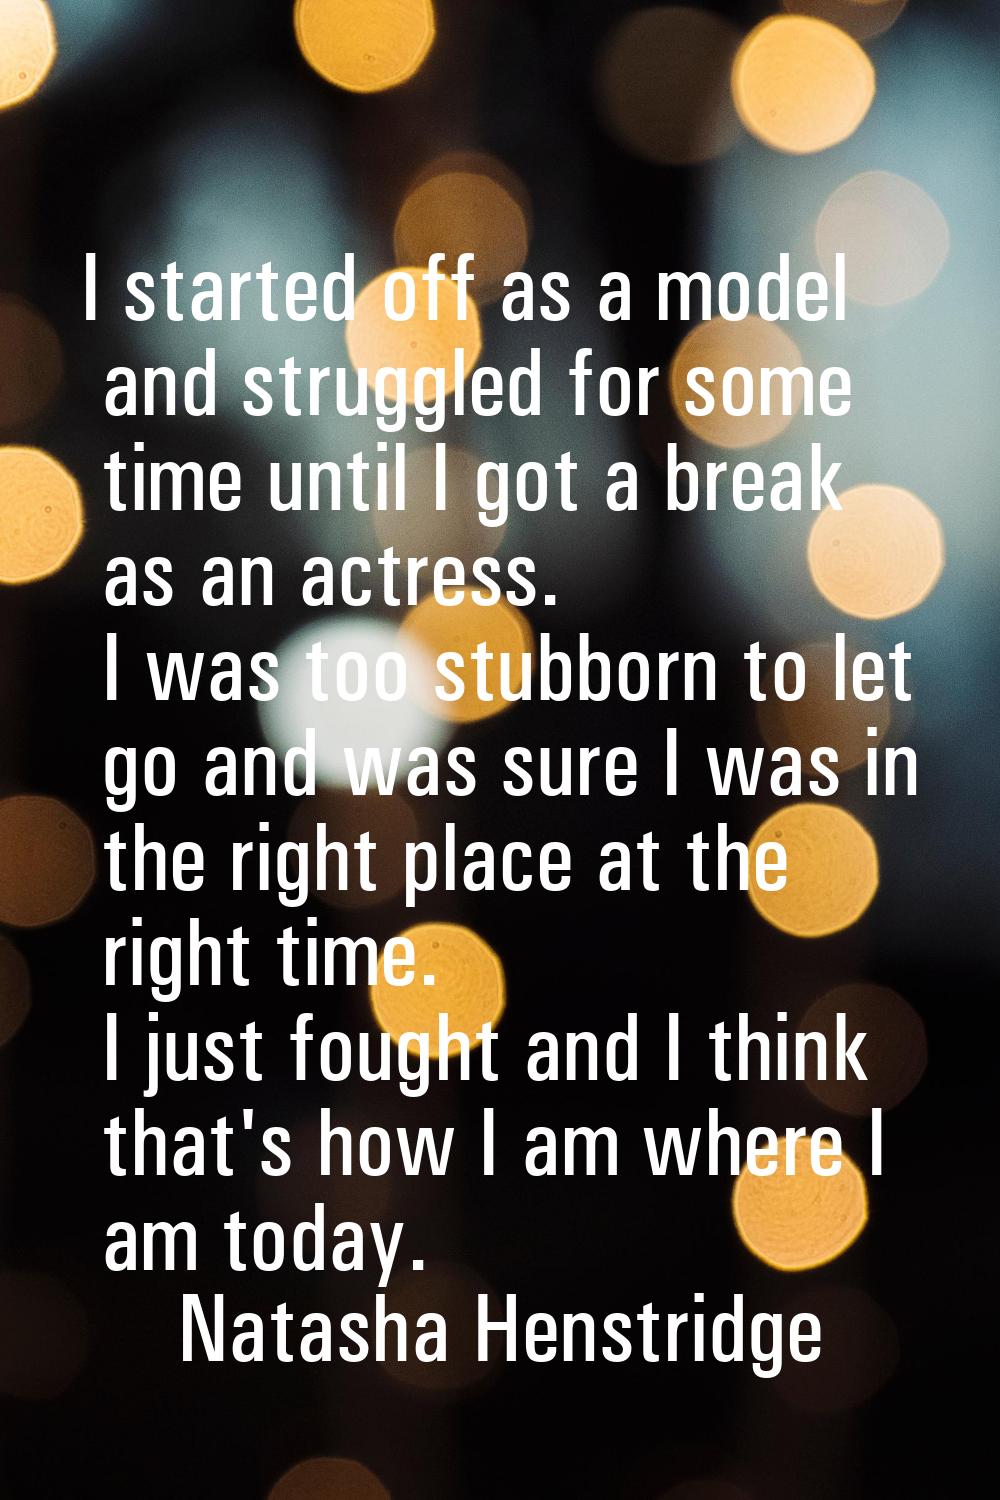 I started off as a model and struggled for some time until I got a break as an actress. I was too s